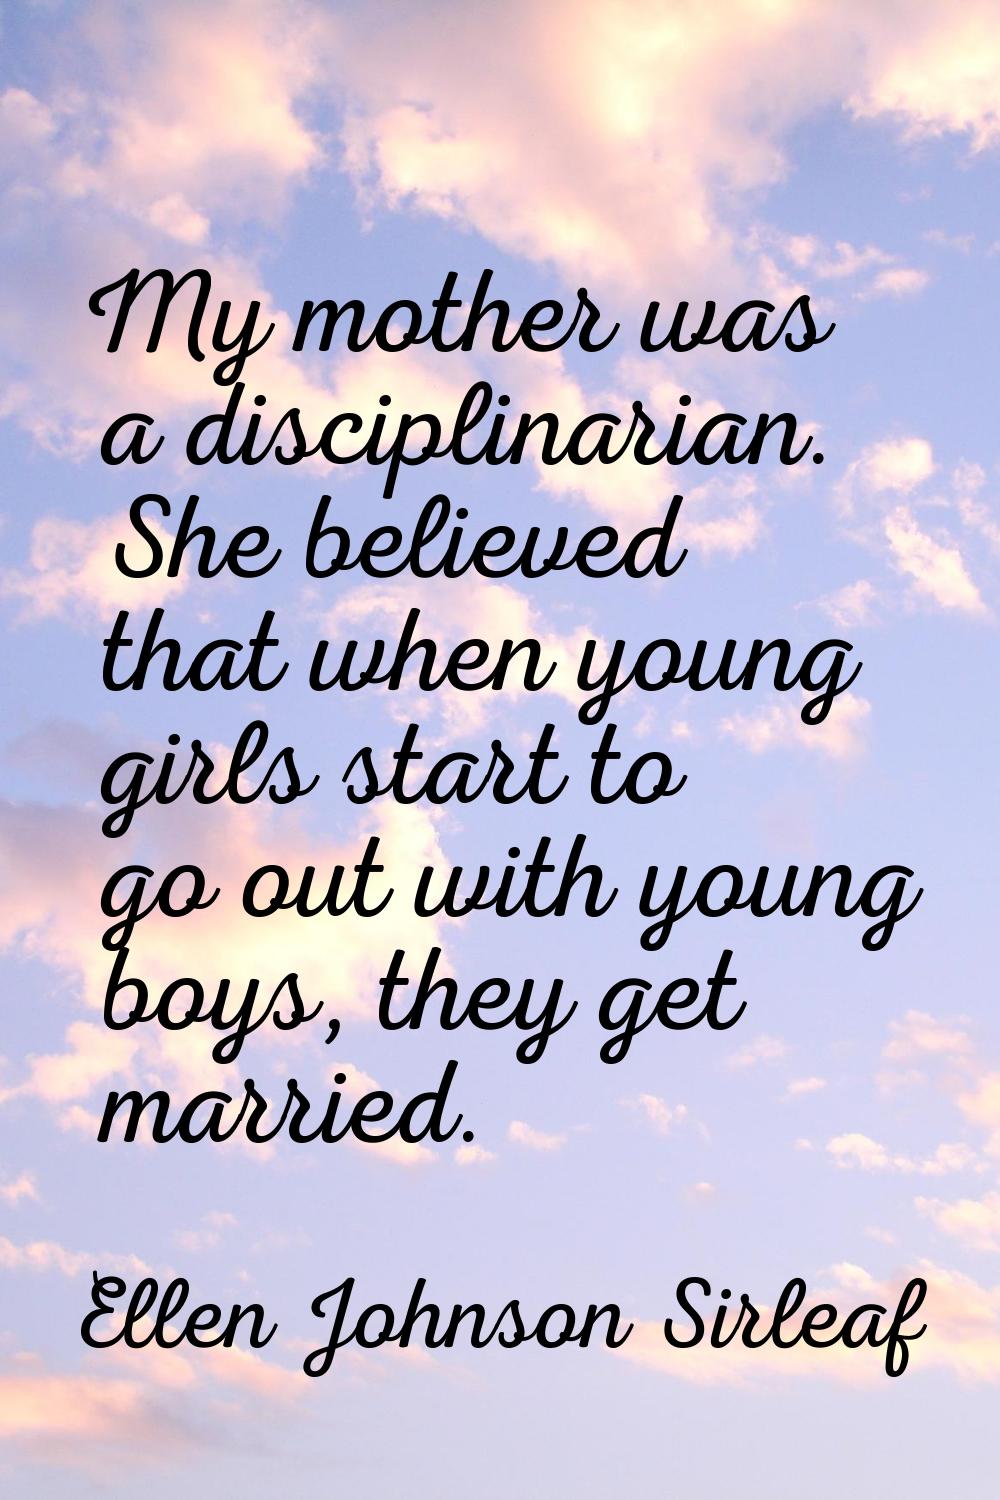 My mother was a disciplinarian. She believed that when young girls start to go out with young boys,